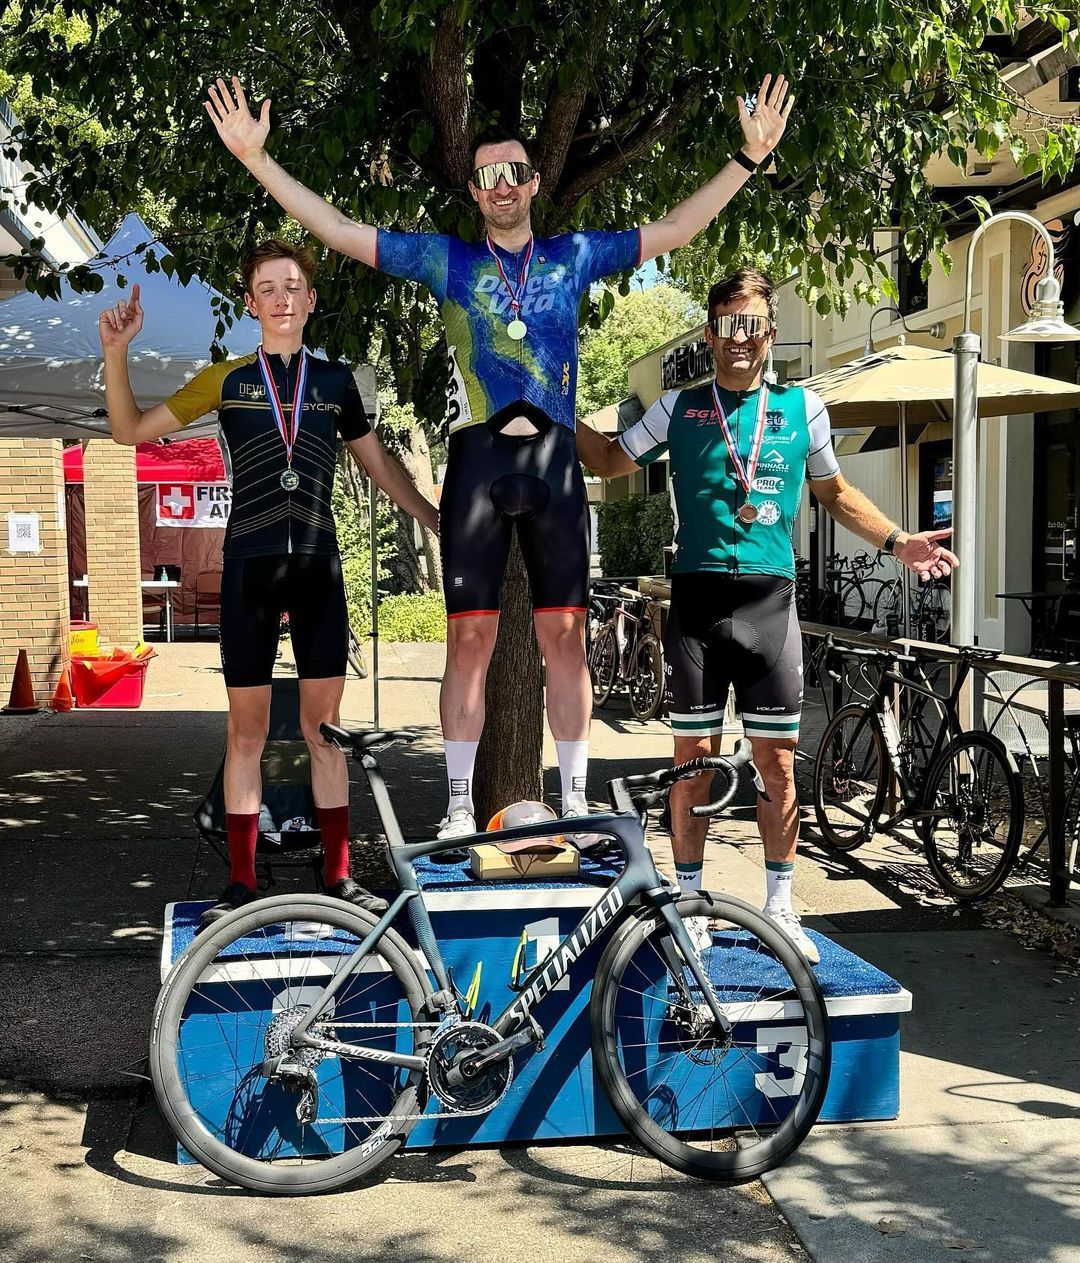 @j__yates wrapping himself in glory with his first 🥇, taking the win in the Cat 4 race at the annual  @dbccycling 4th of July Criterium! 

@sportful @sfitalianathleticclub @equatorcoffees @poggio_labs @achieveptc @tripsforkidsmarin @sage.realestategroup @marinservicecourse @jkbrkb  #onewealthadvisors